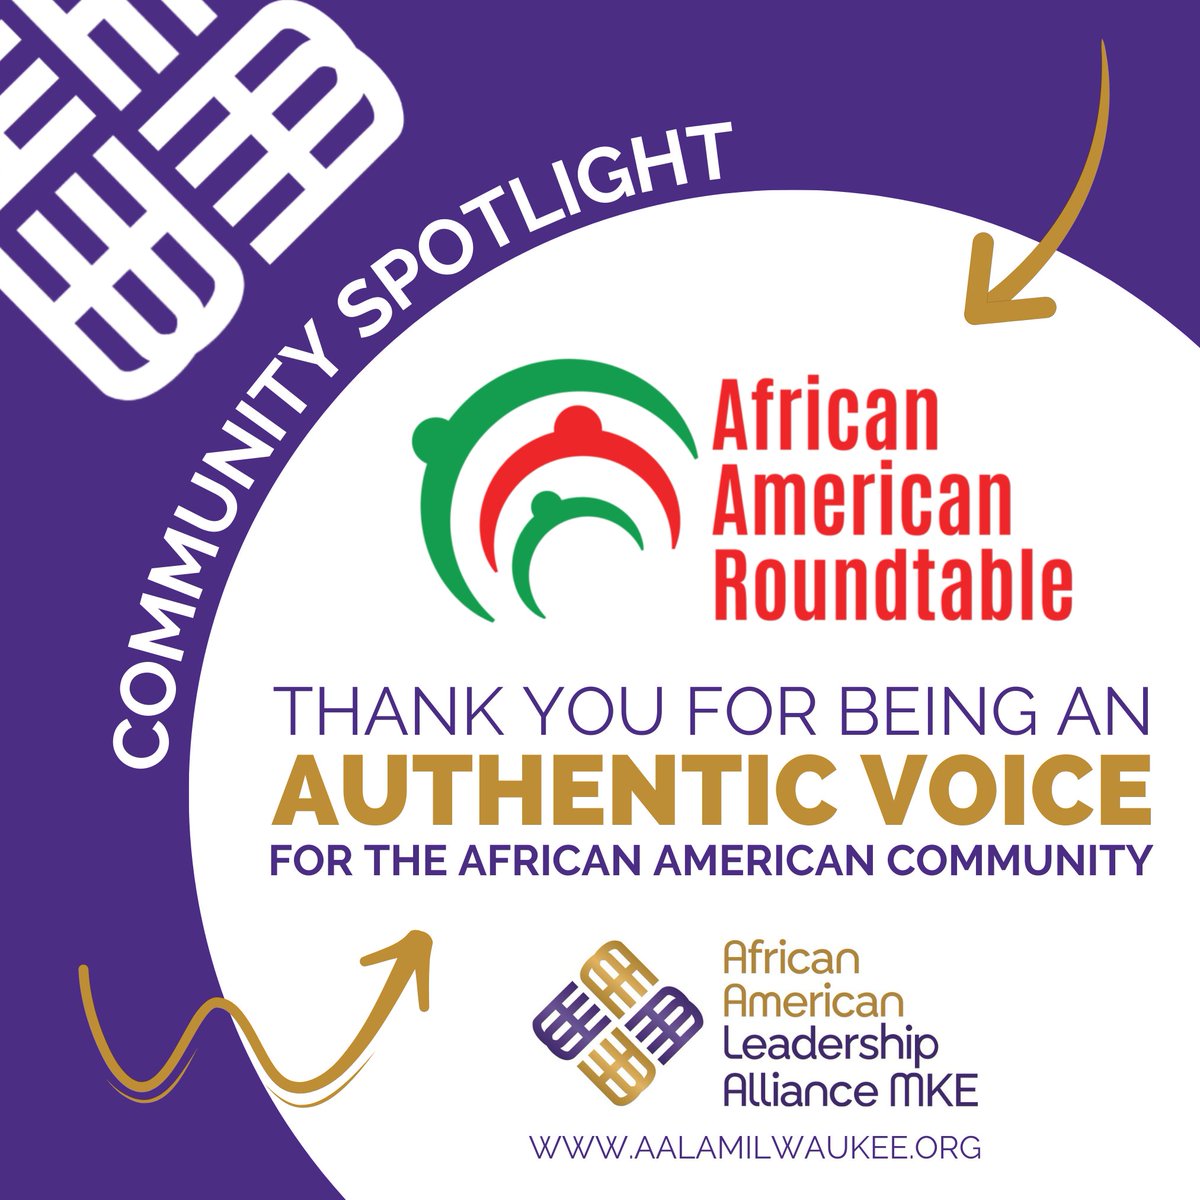 Shoutout to the African American Roundtable for being an authentic voice for our community! We appreciate your dedication to representing our voices and uplifting our concerns. 
@AARTMKE 
@wjlanier #AALAM #CommunityVoice #AARTPB2023 #ShapeOurFuture